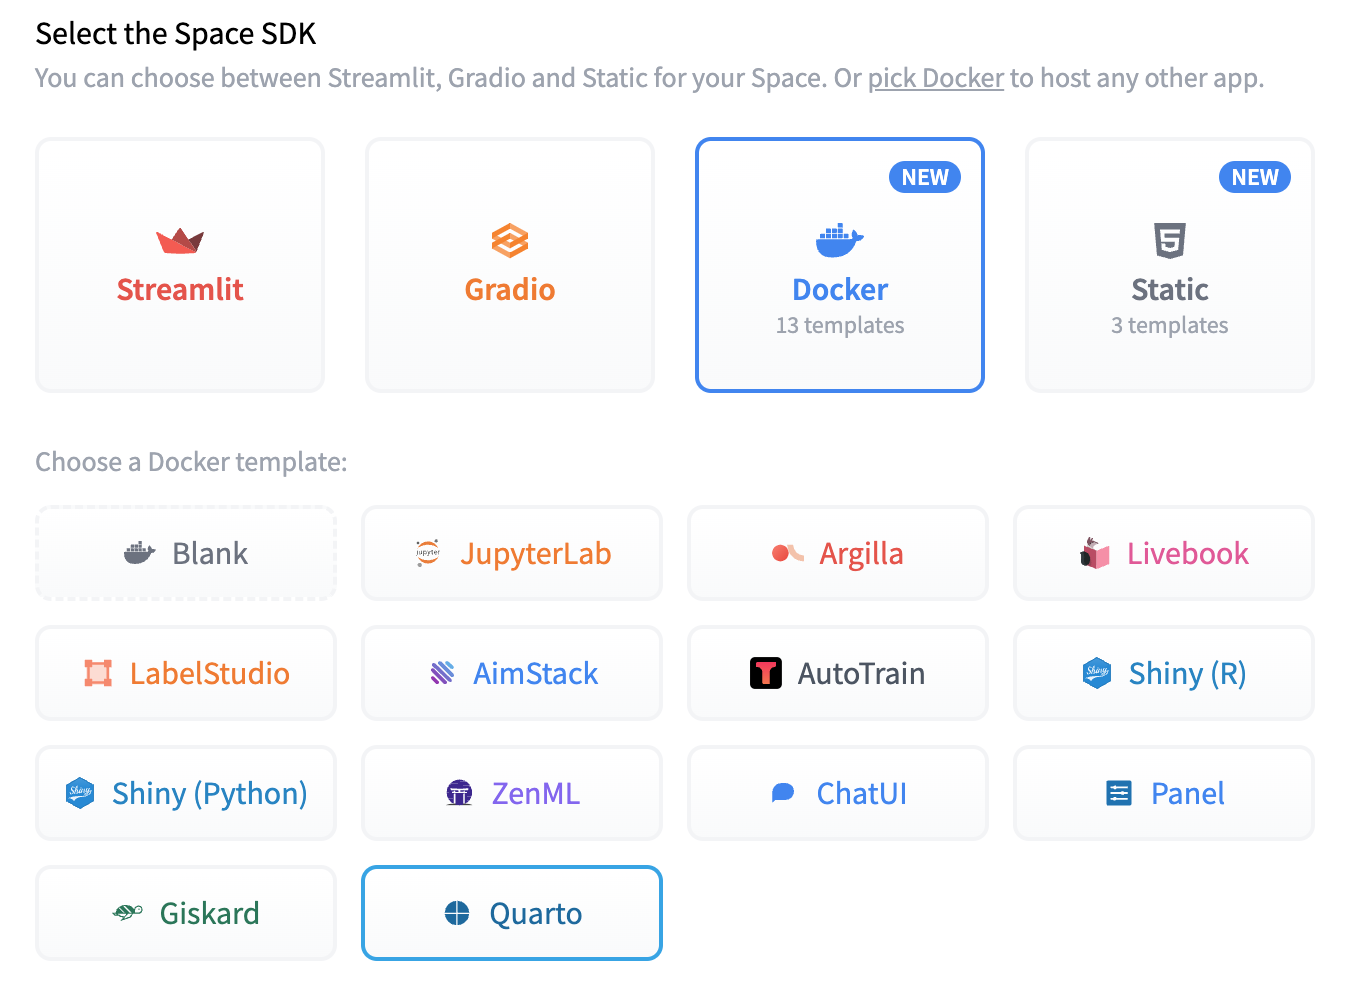 Screenshot of Hugging Face Space selection screen showing Docker selected as the SDK, and Quarto selected as the Docker template.